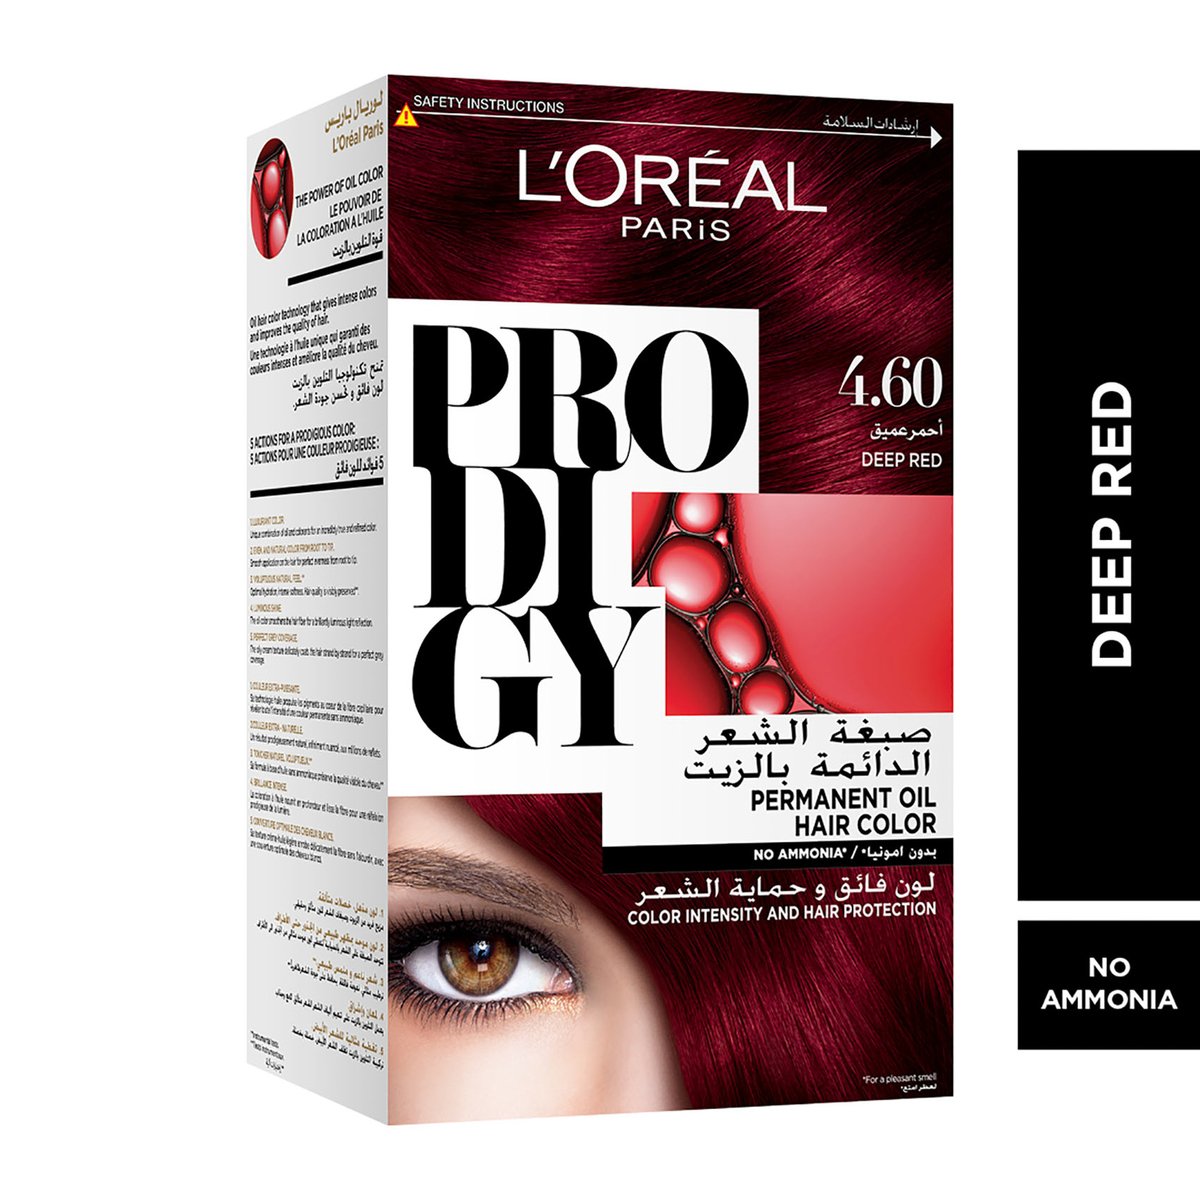 Buy LOreal Paris Prodigy Hair Color 4.60 Deep Red 1 pkt Online at Best Price | Permanent Colorants | Lulu Kuwait in UAE